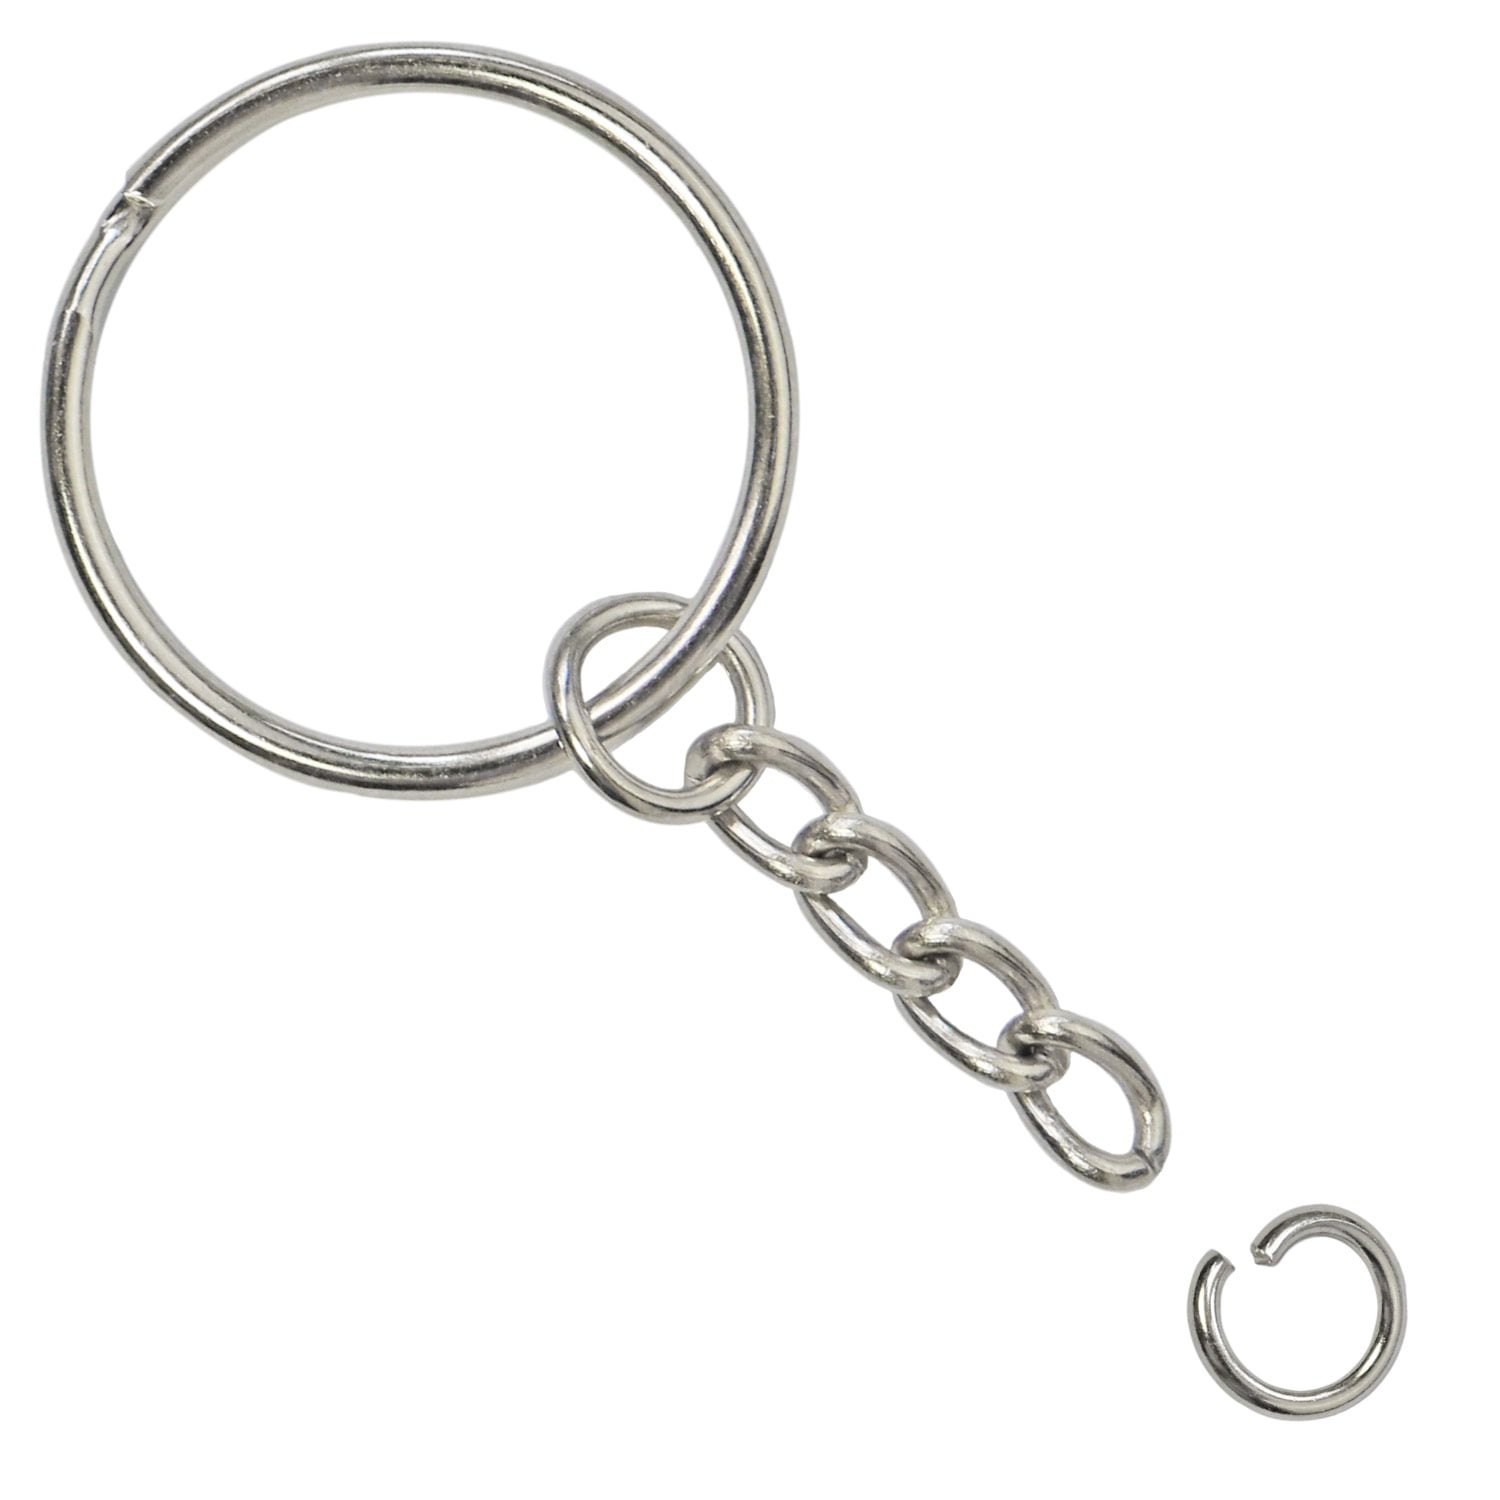 Buy 1 Inch Split Ring Key Chain Rings Closeout Online